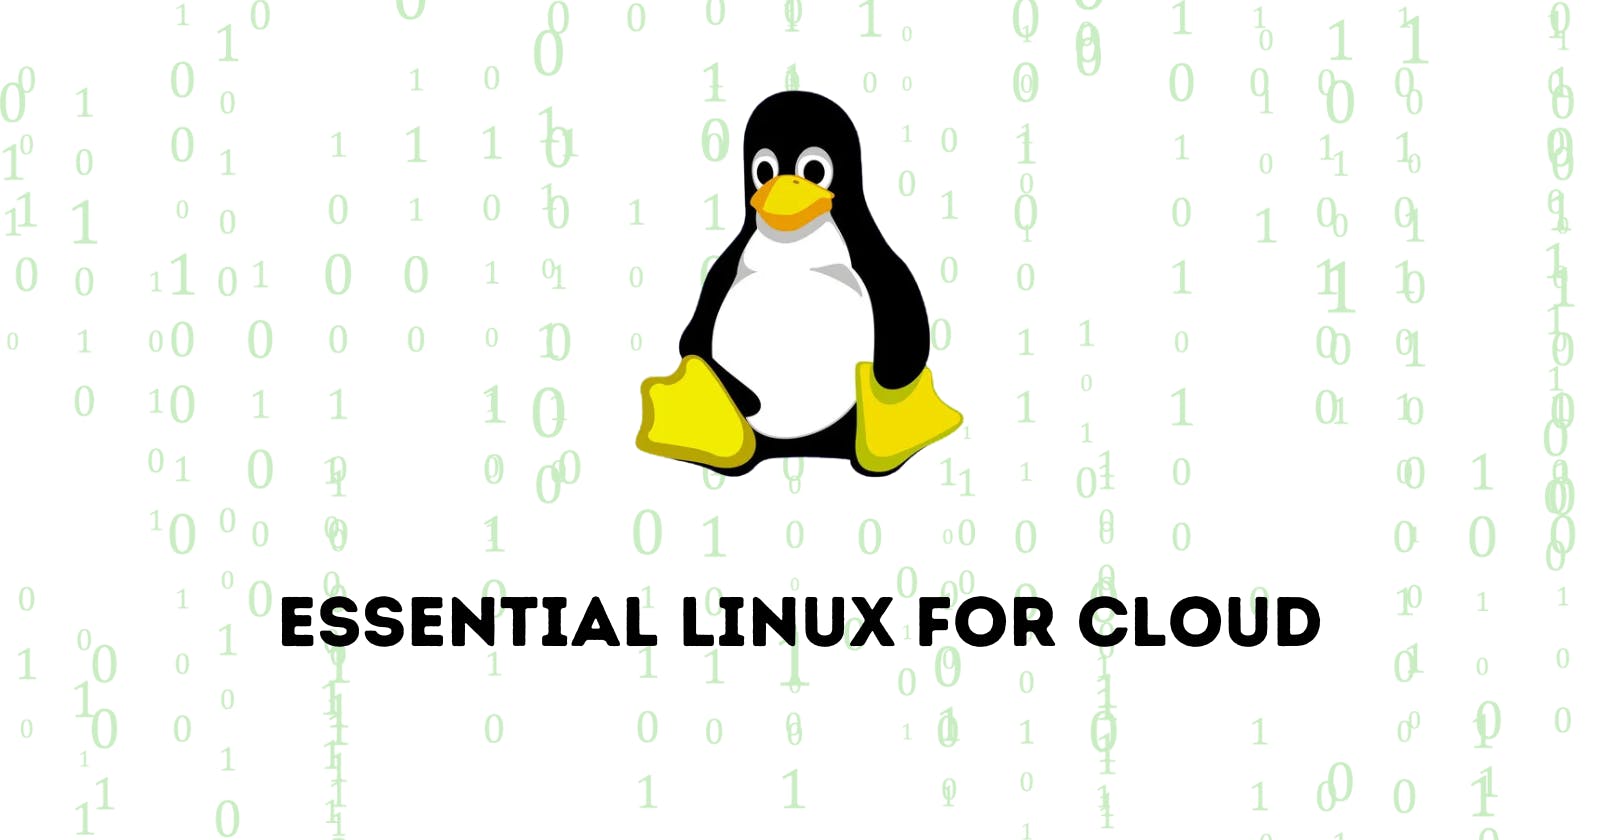 Essential Linux for Cloud